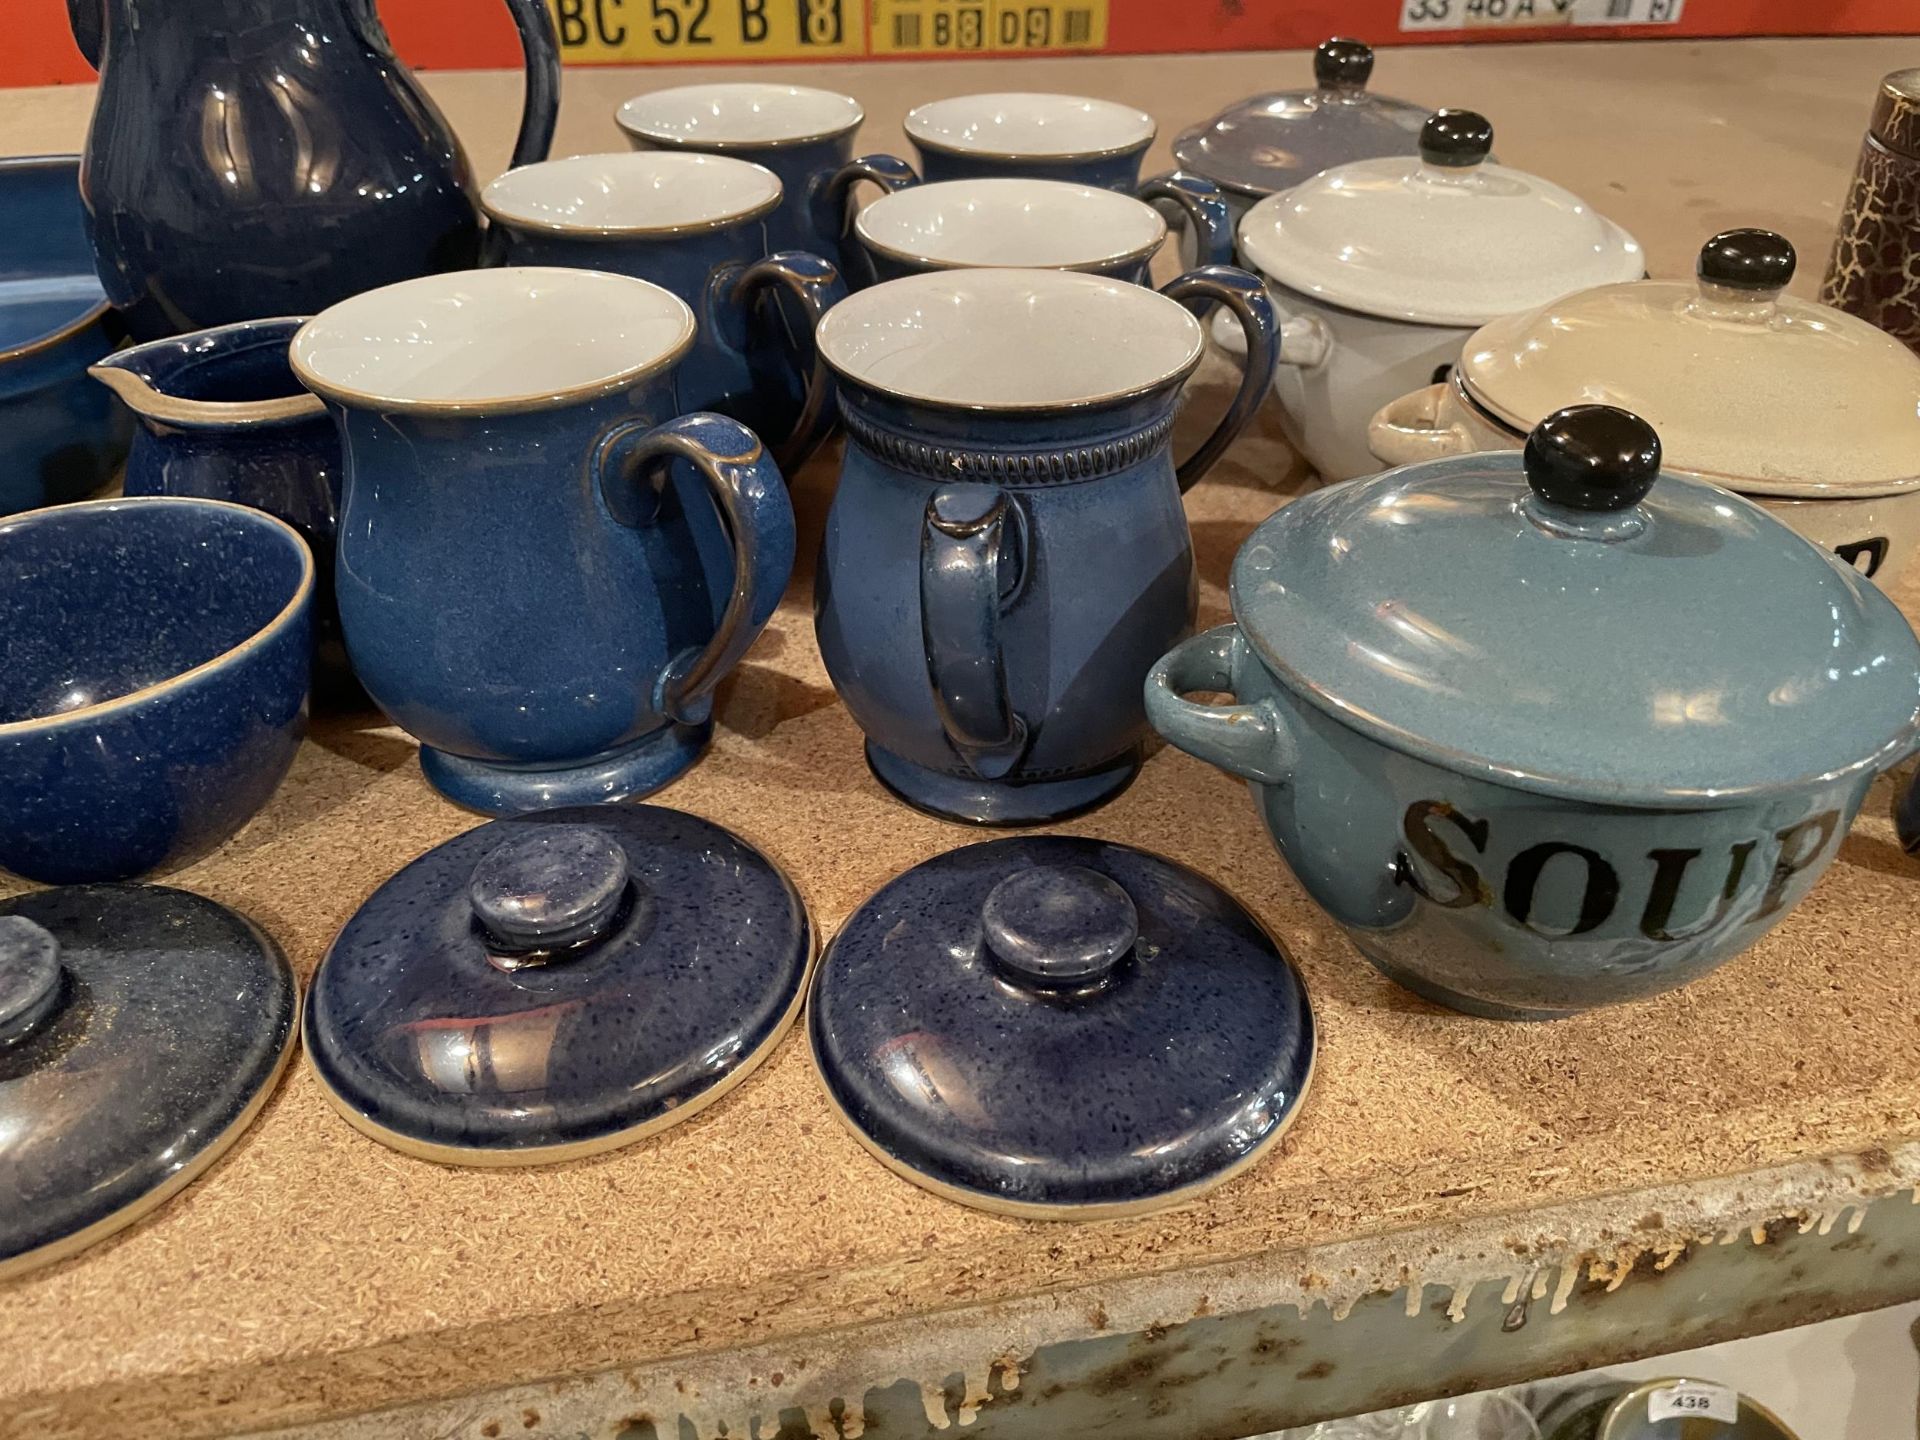 A BLUE COLLECTION TO INCLUDE SOME DENBY MUGS, LIDDED CASSEROLE DISHES , LIDDED SOUP BOWLS ETC - Image 3 of 3